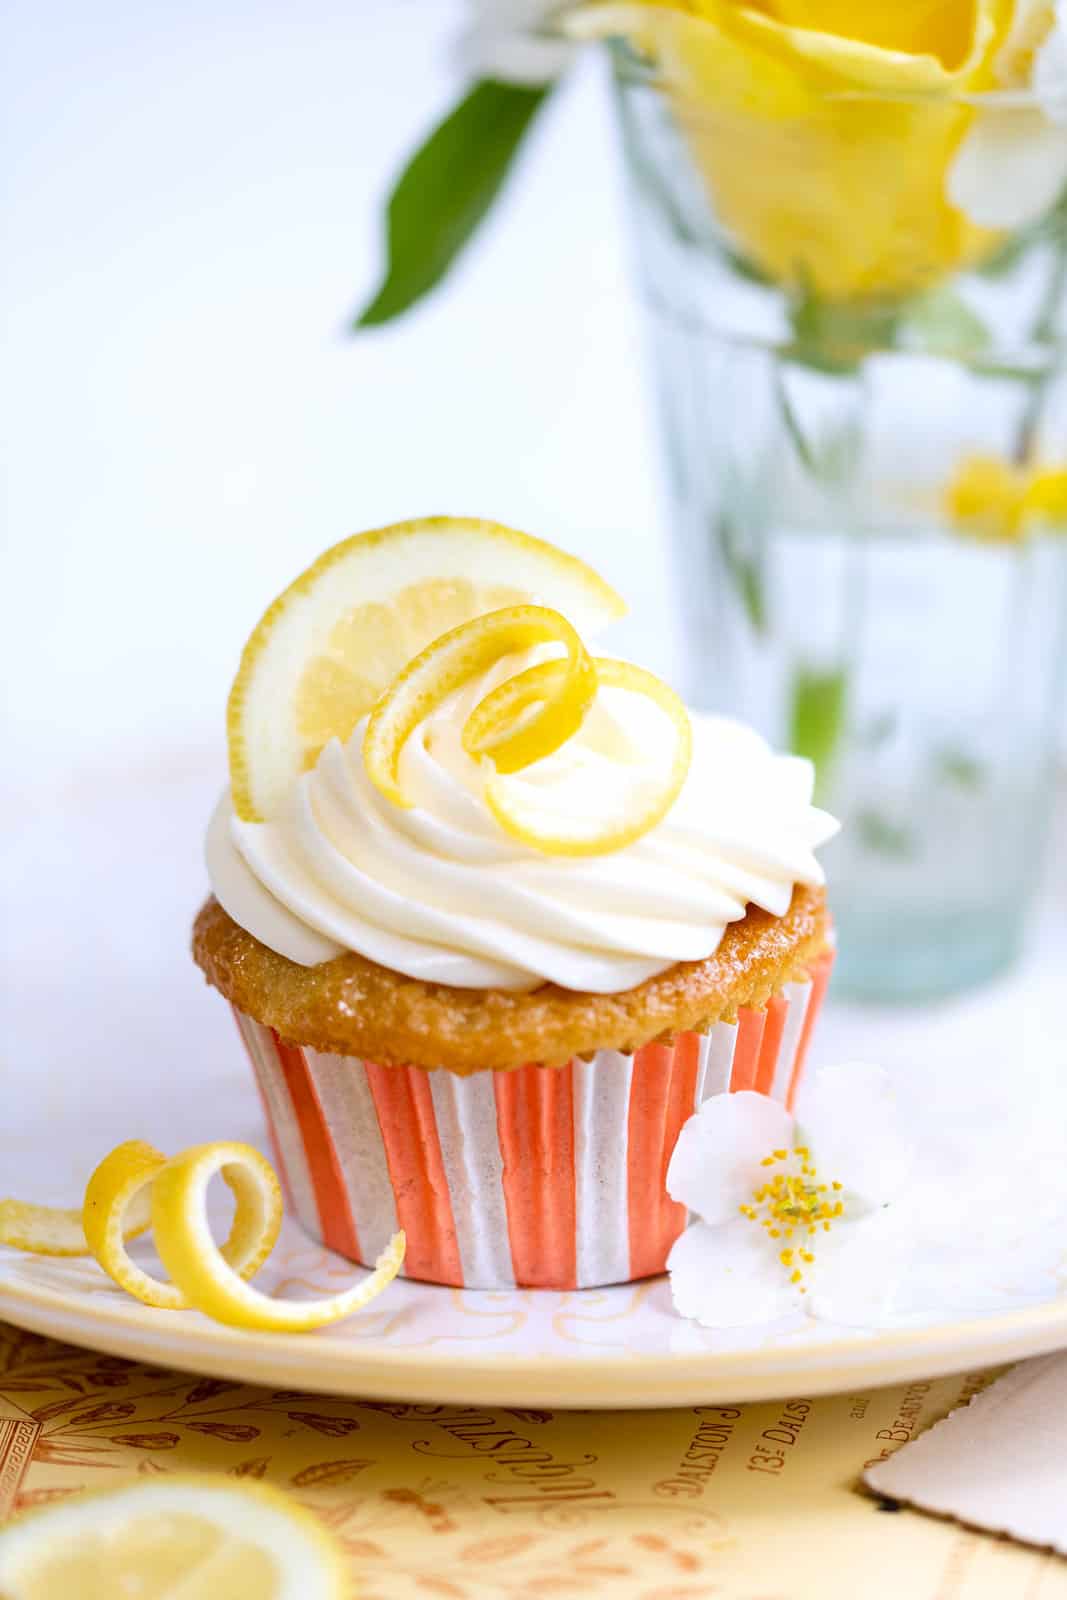 lemon drizzle cupcake topped with cream cheese frosting and garnished with lemon zest and slice on a plate